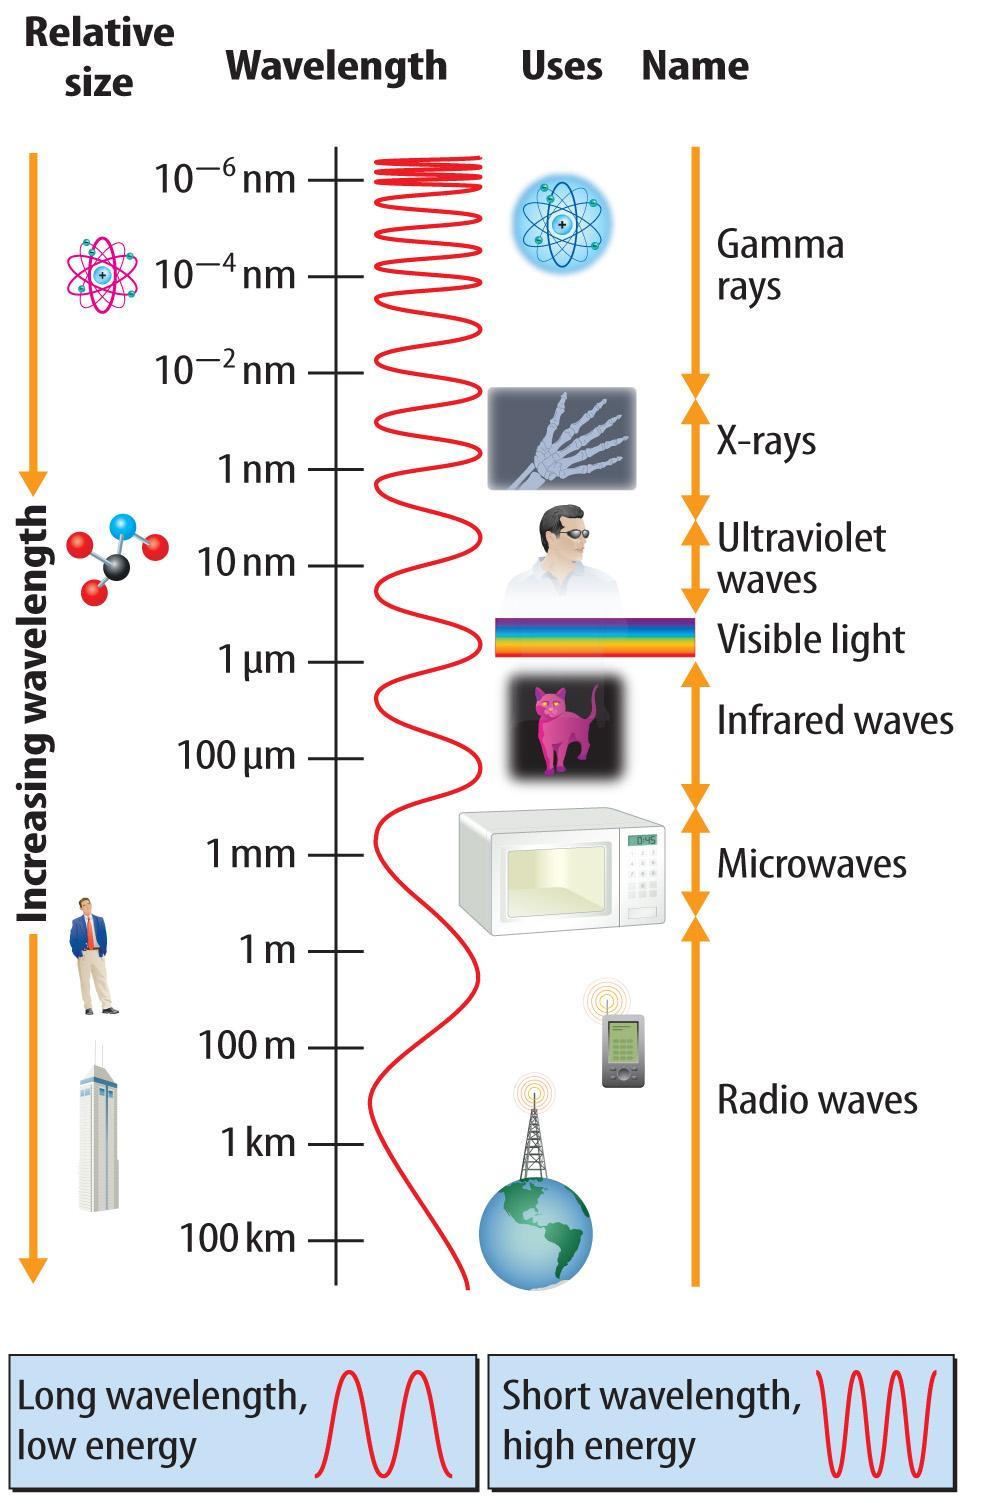 Most wavelengths of the electromagnetic